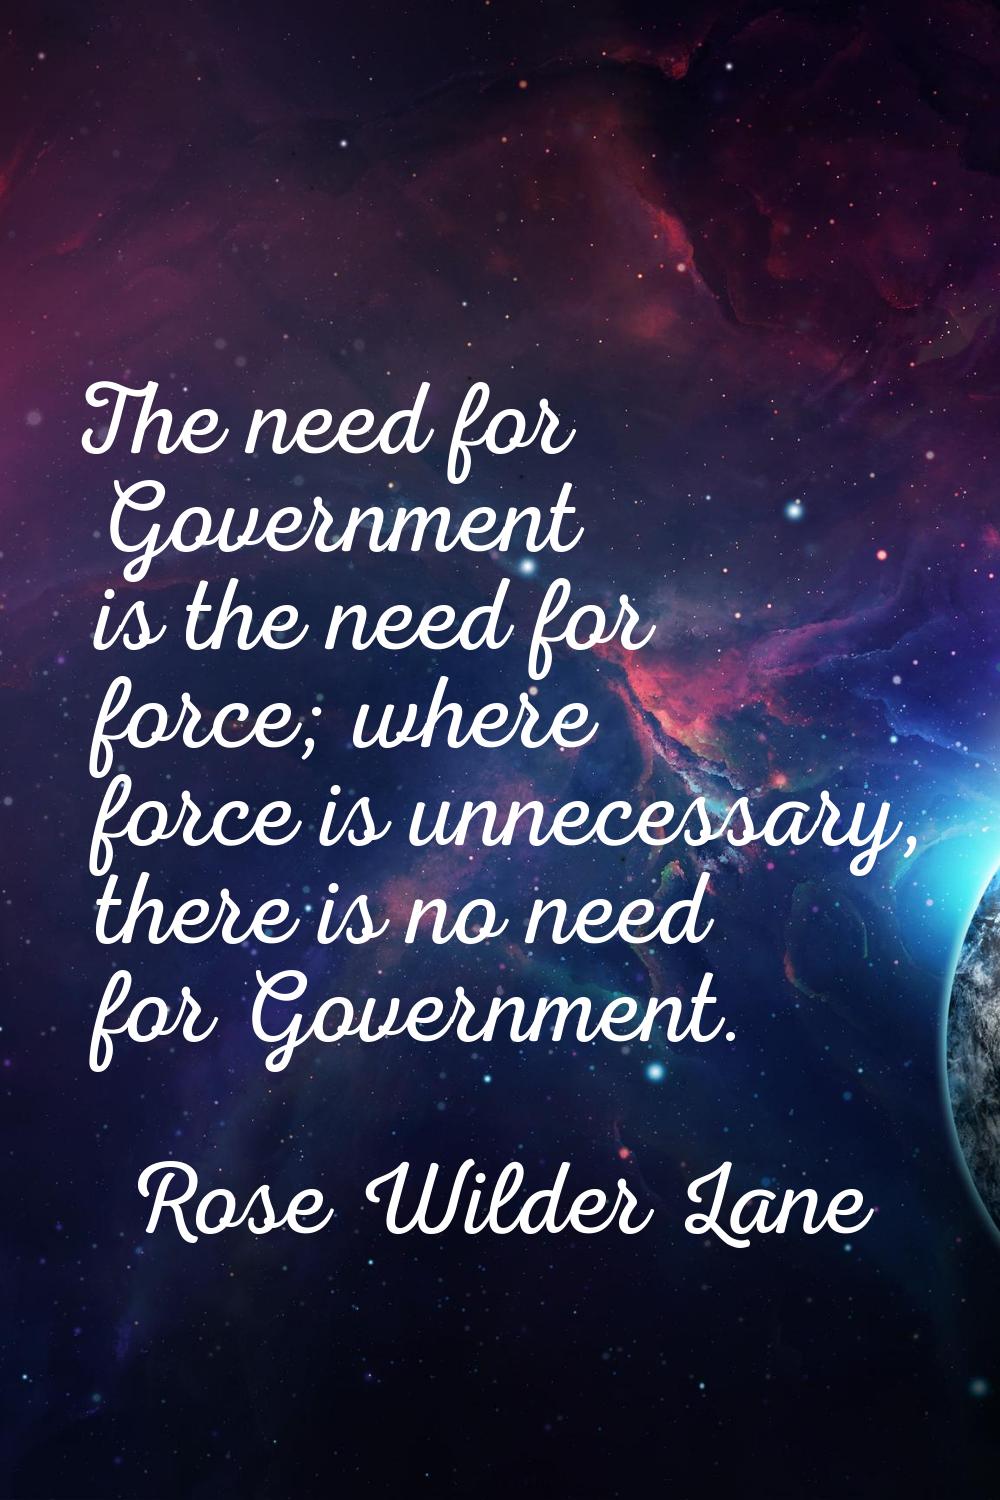 The need for Government is the need for force; where force is unnecessary, there is no need for Gov